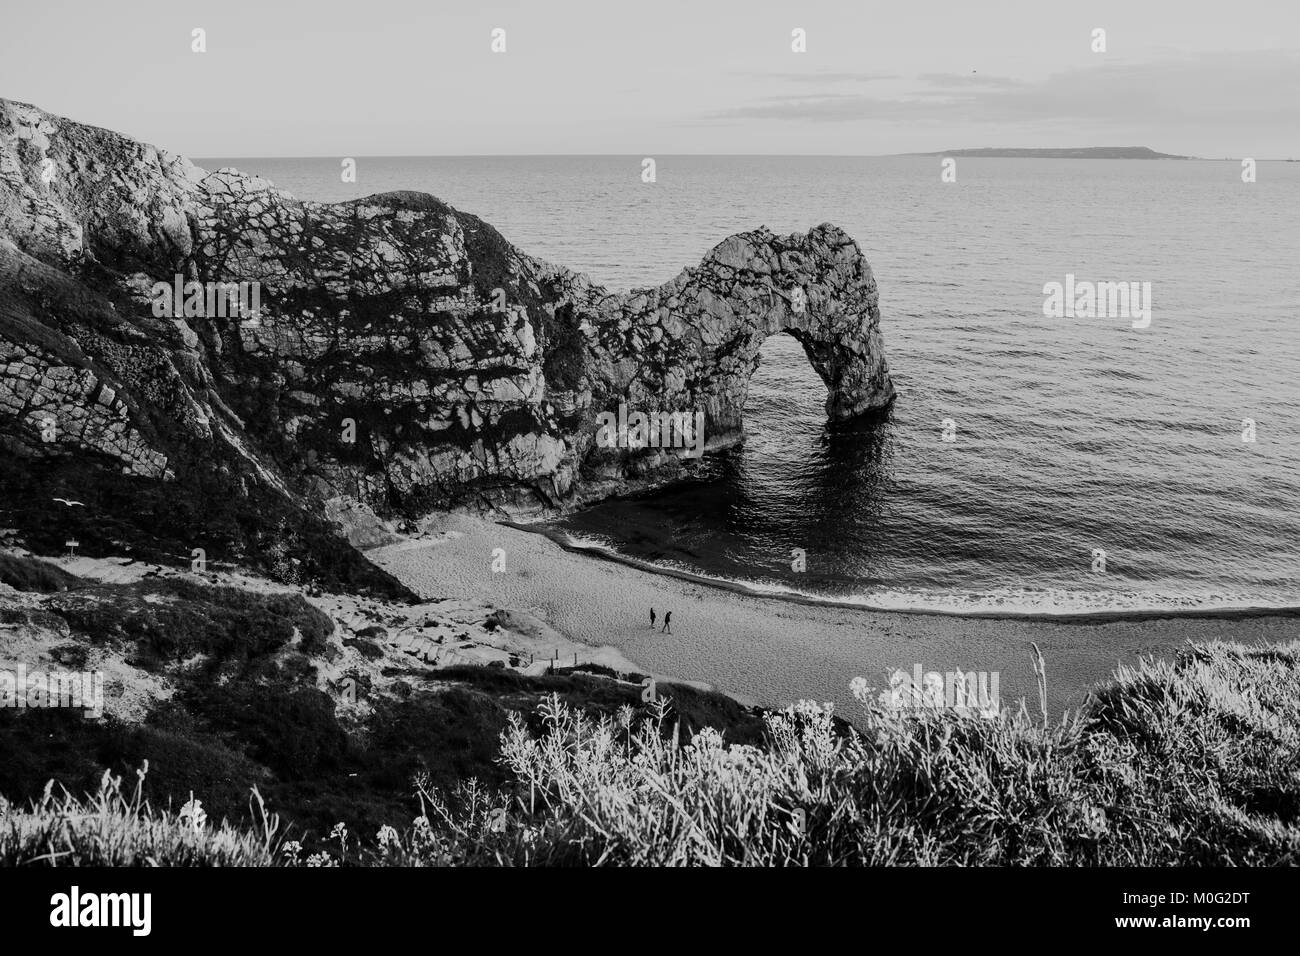 Black & white view from the hill over people walking on a beach by the sea and Durdle Door, a natural limestone arch on Jurassic Coastline, UK. Stock Photo